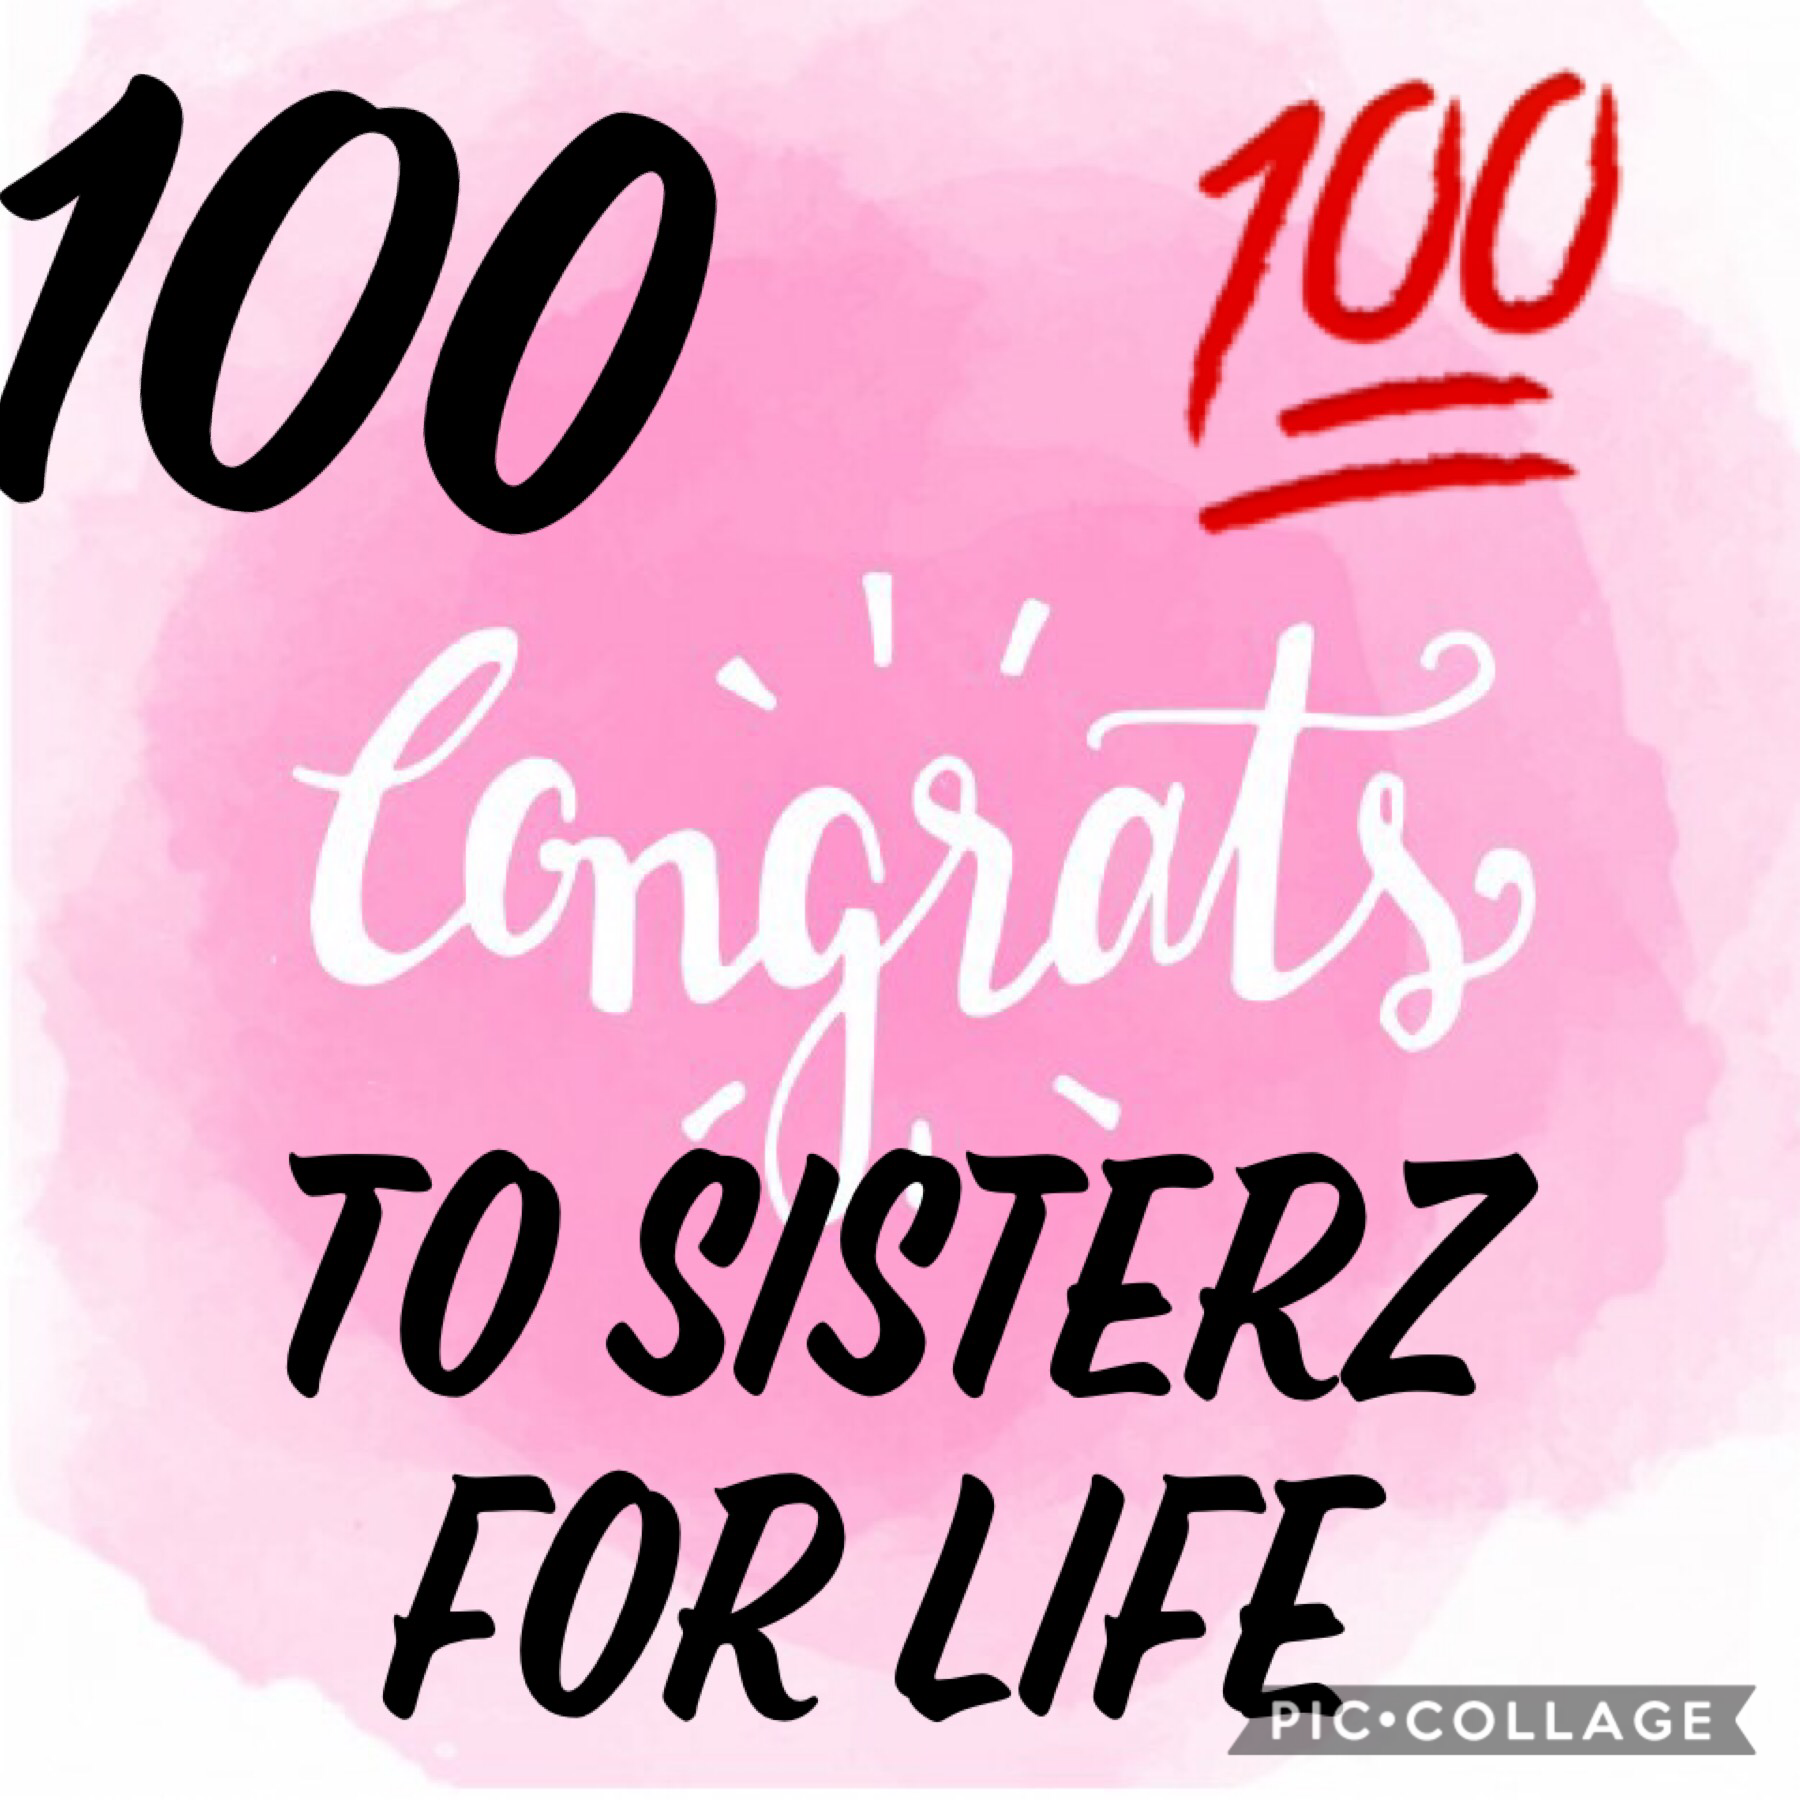 Tap
Congrats to Sisterz_For_Life on 100 guys you guys deserve it
If your not already following them then go right now because there amazing people and a great friend to have on pic collage 💕